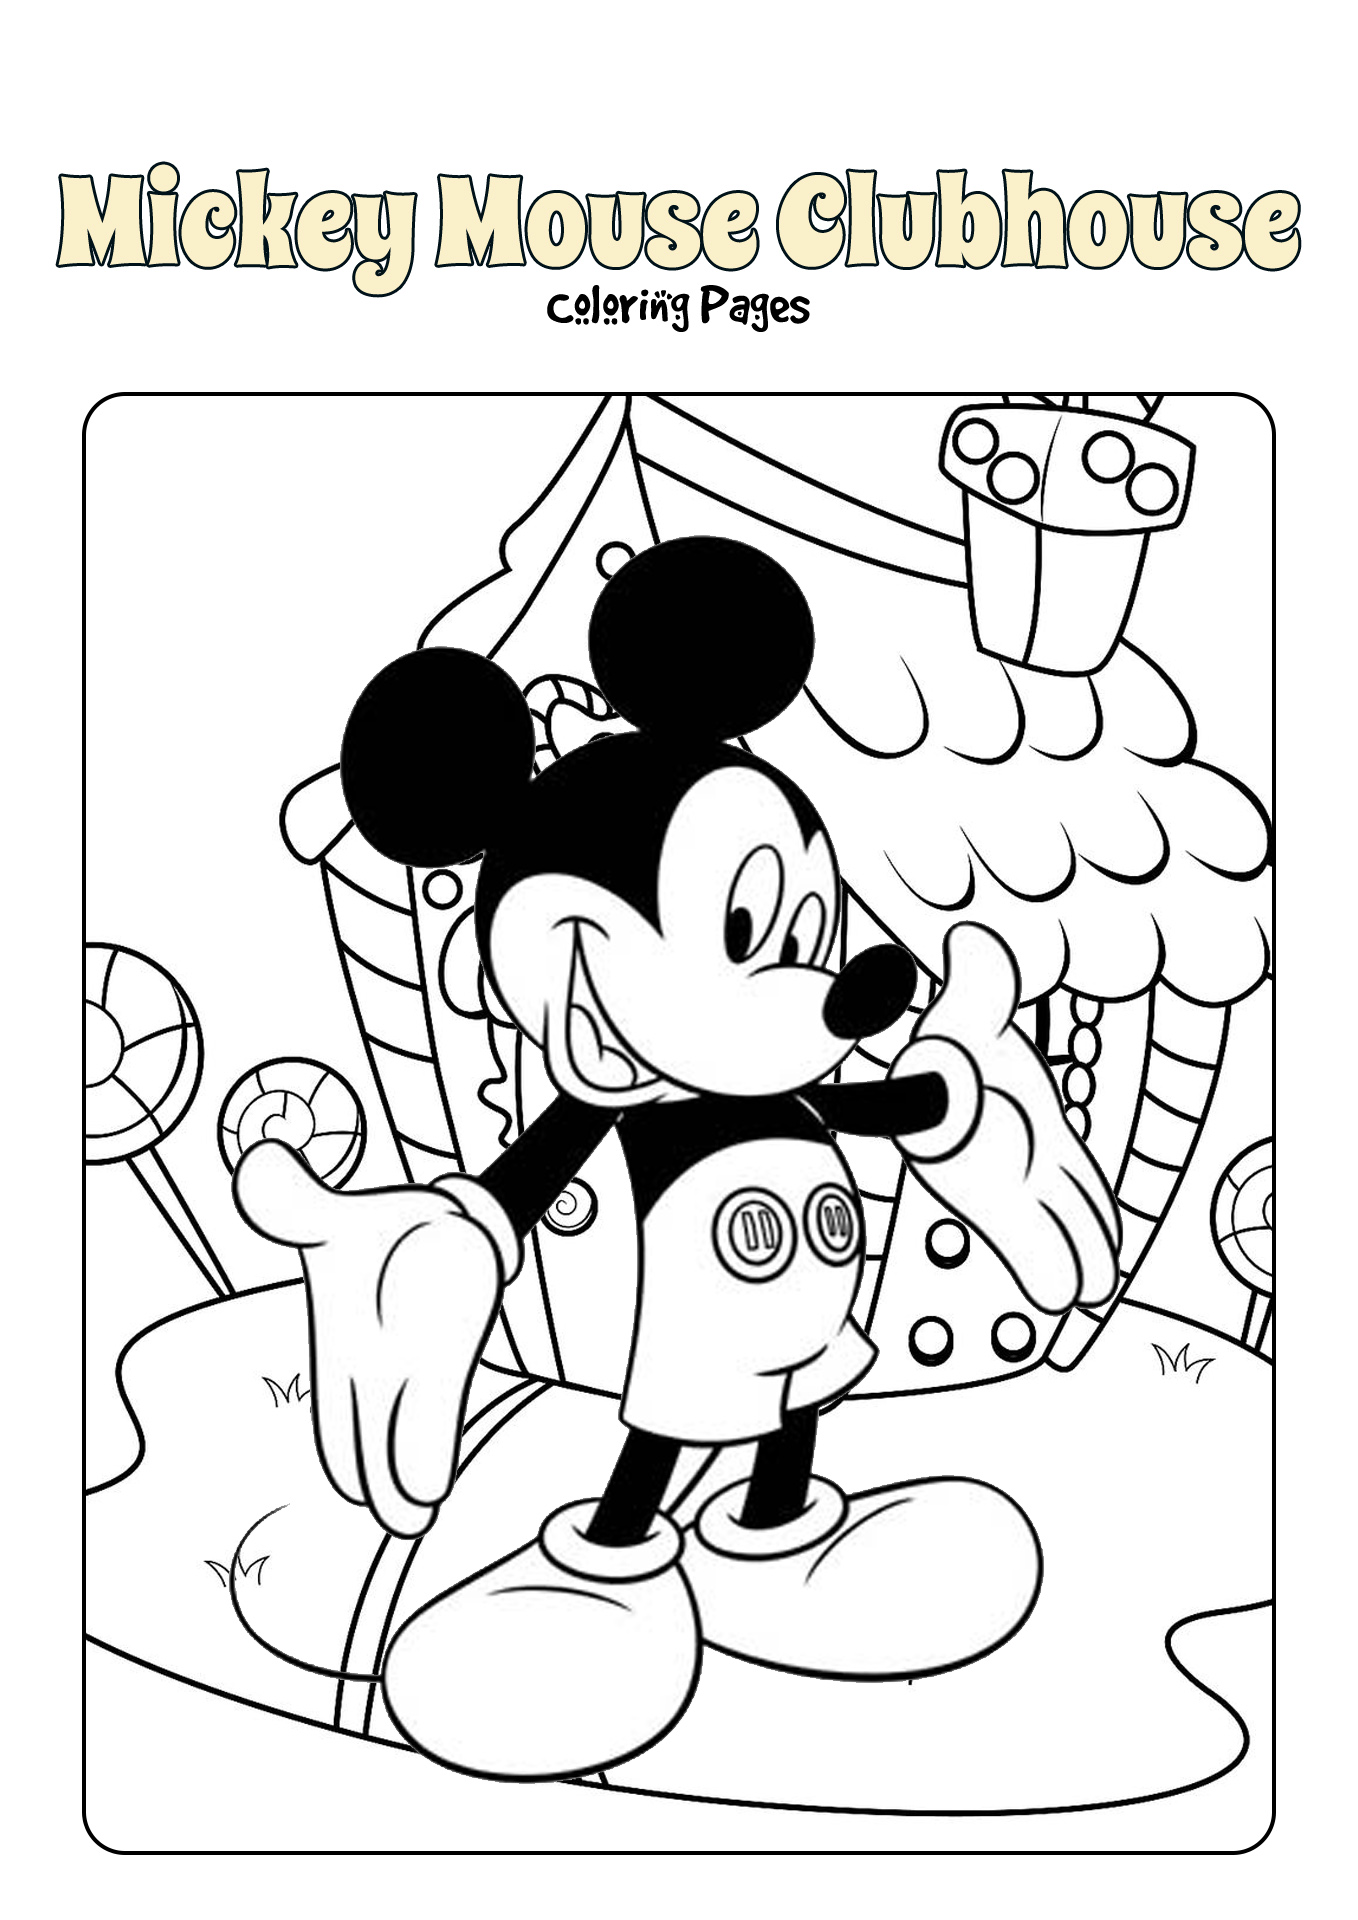 12-best-images-of-mickey-mouse-math-worksheets-mickey-mouse-printable-worksheets-mickey-mouse